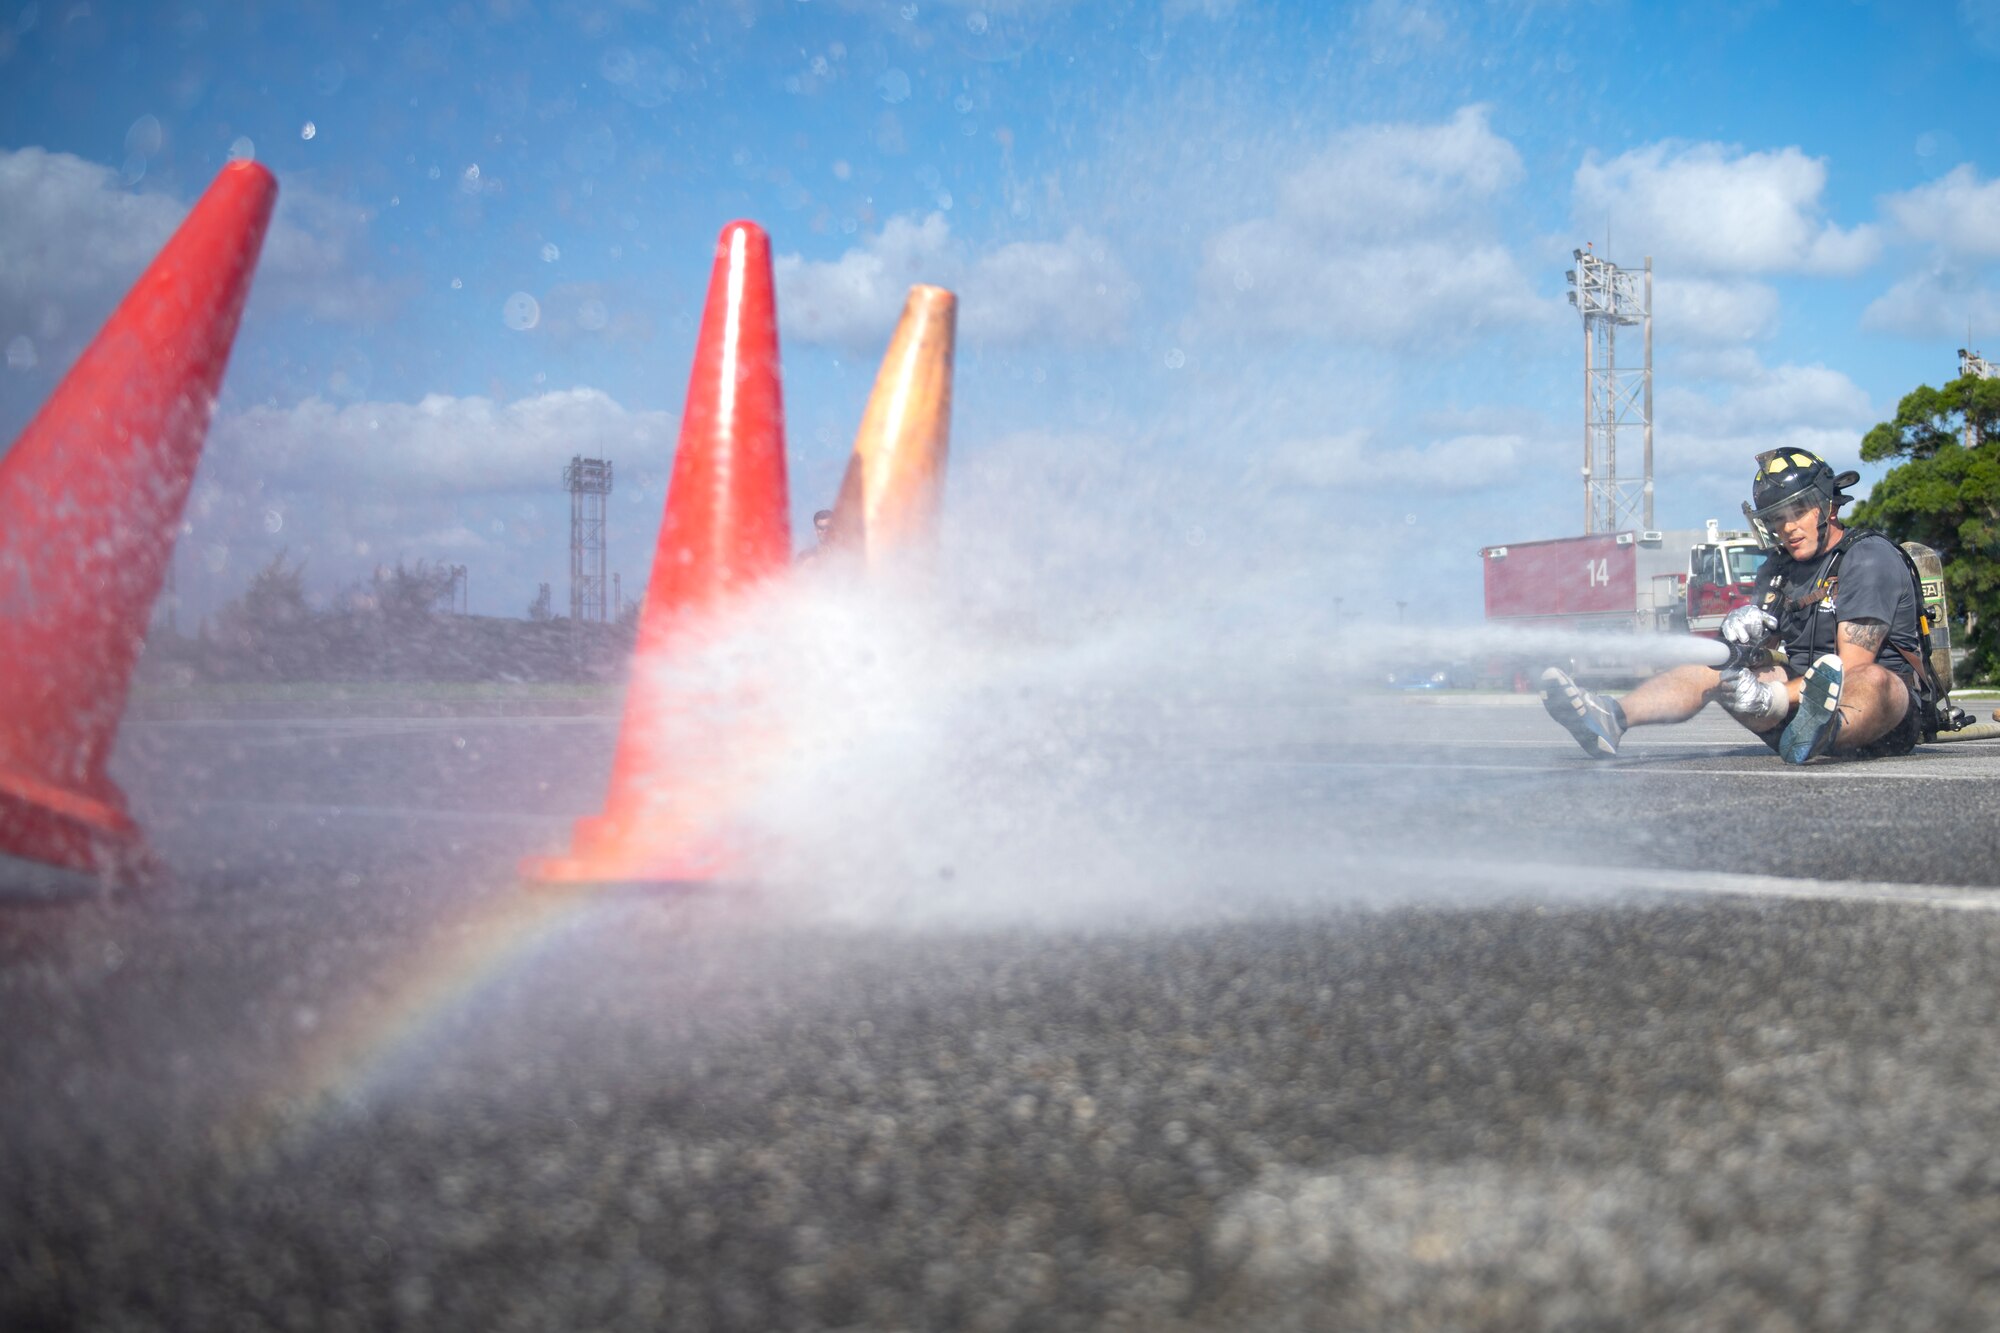 U.S. Air Force Capt. Drew Kerber, 18th Civil Engineer Squadron group executive officer, displaces traffic cones with a fire hose at the fire muster challenge during National Fire Prevention Week at Kadena Air Base, Japan, Oct. 6, 2022. The relay event gave teams of four the opportunity to compete for best time while conquering firefighter training-related obstacles. (U.S. Air Force photo by Senior Airman Jessi Roth)